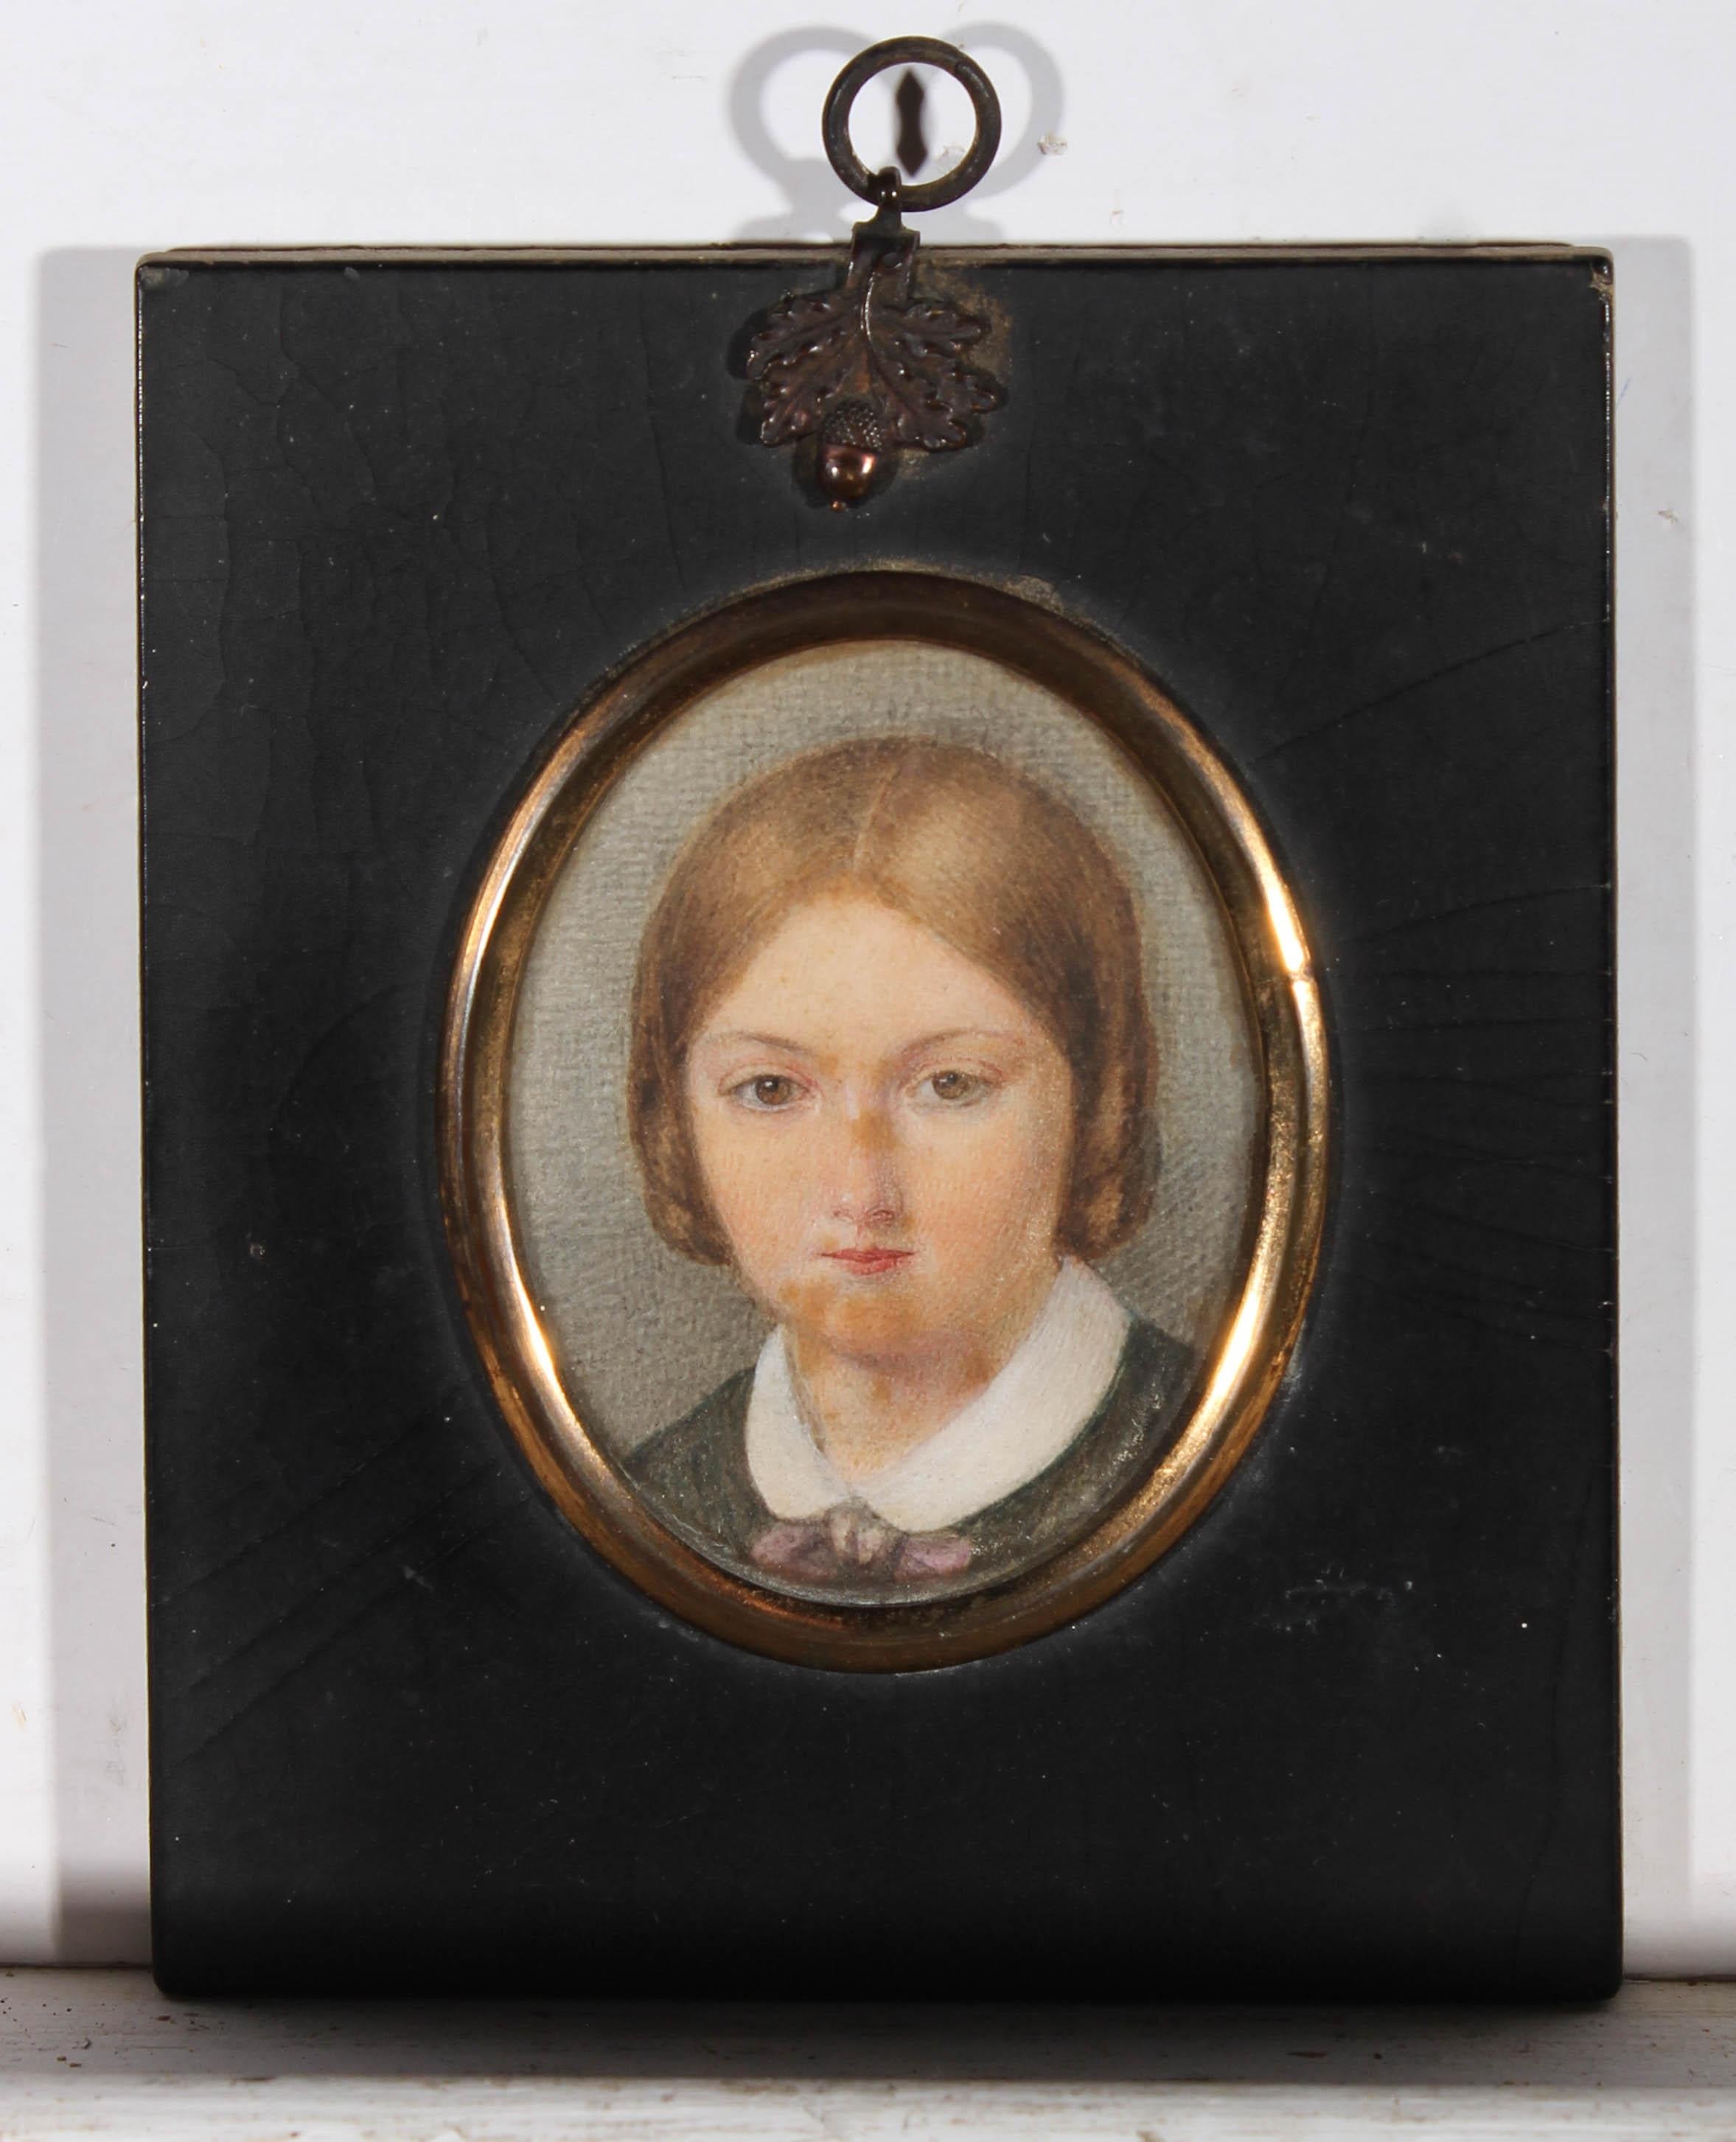 A very fine miniature portrait of Mary Knottesford Fortescue (1841-1879). Mary was the daughter of Edward Bowles Knottesford Fortescue (1816-1877), who was an English Anglican priest who, in later life converted to Catholicism.

In this portrait,